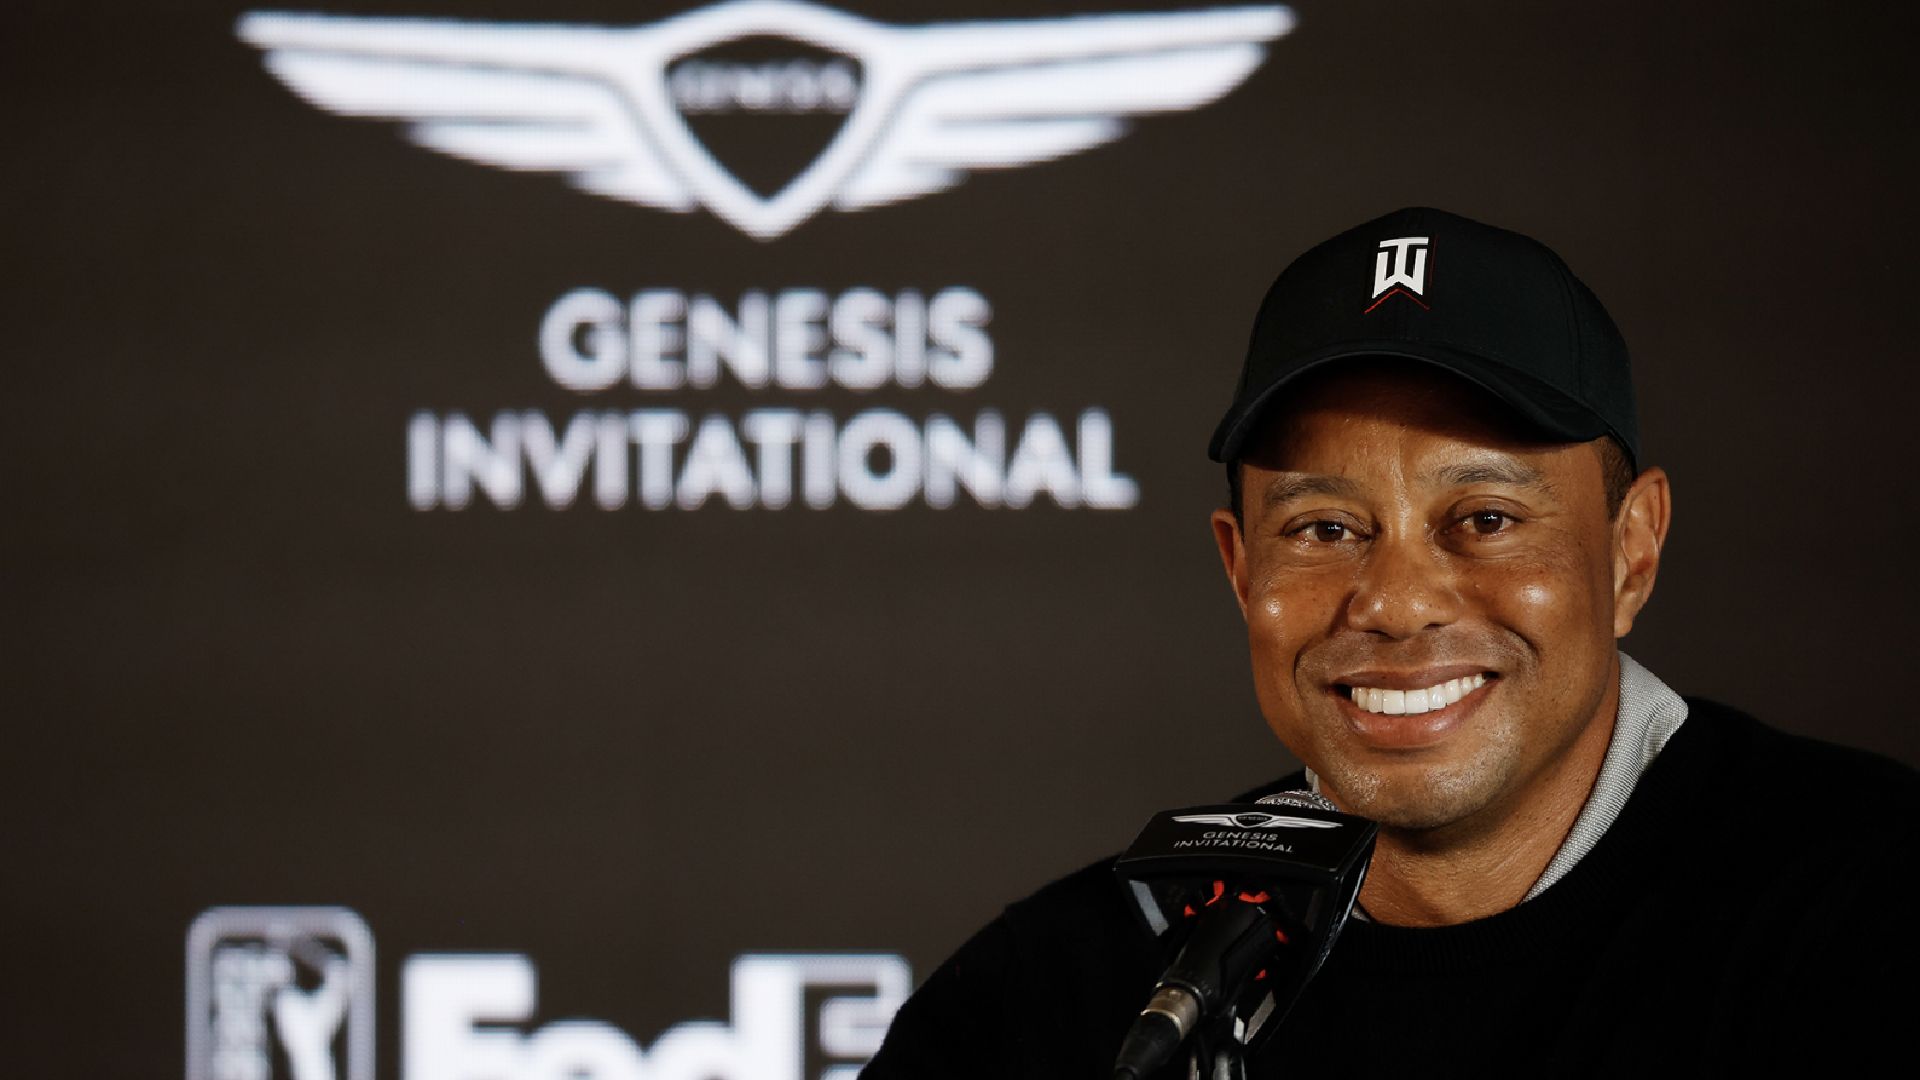 Tiger Woods returns to the Genesis Invitational, along with a loaded field